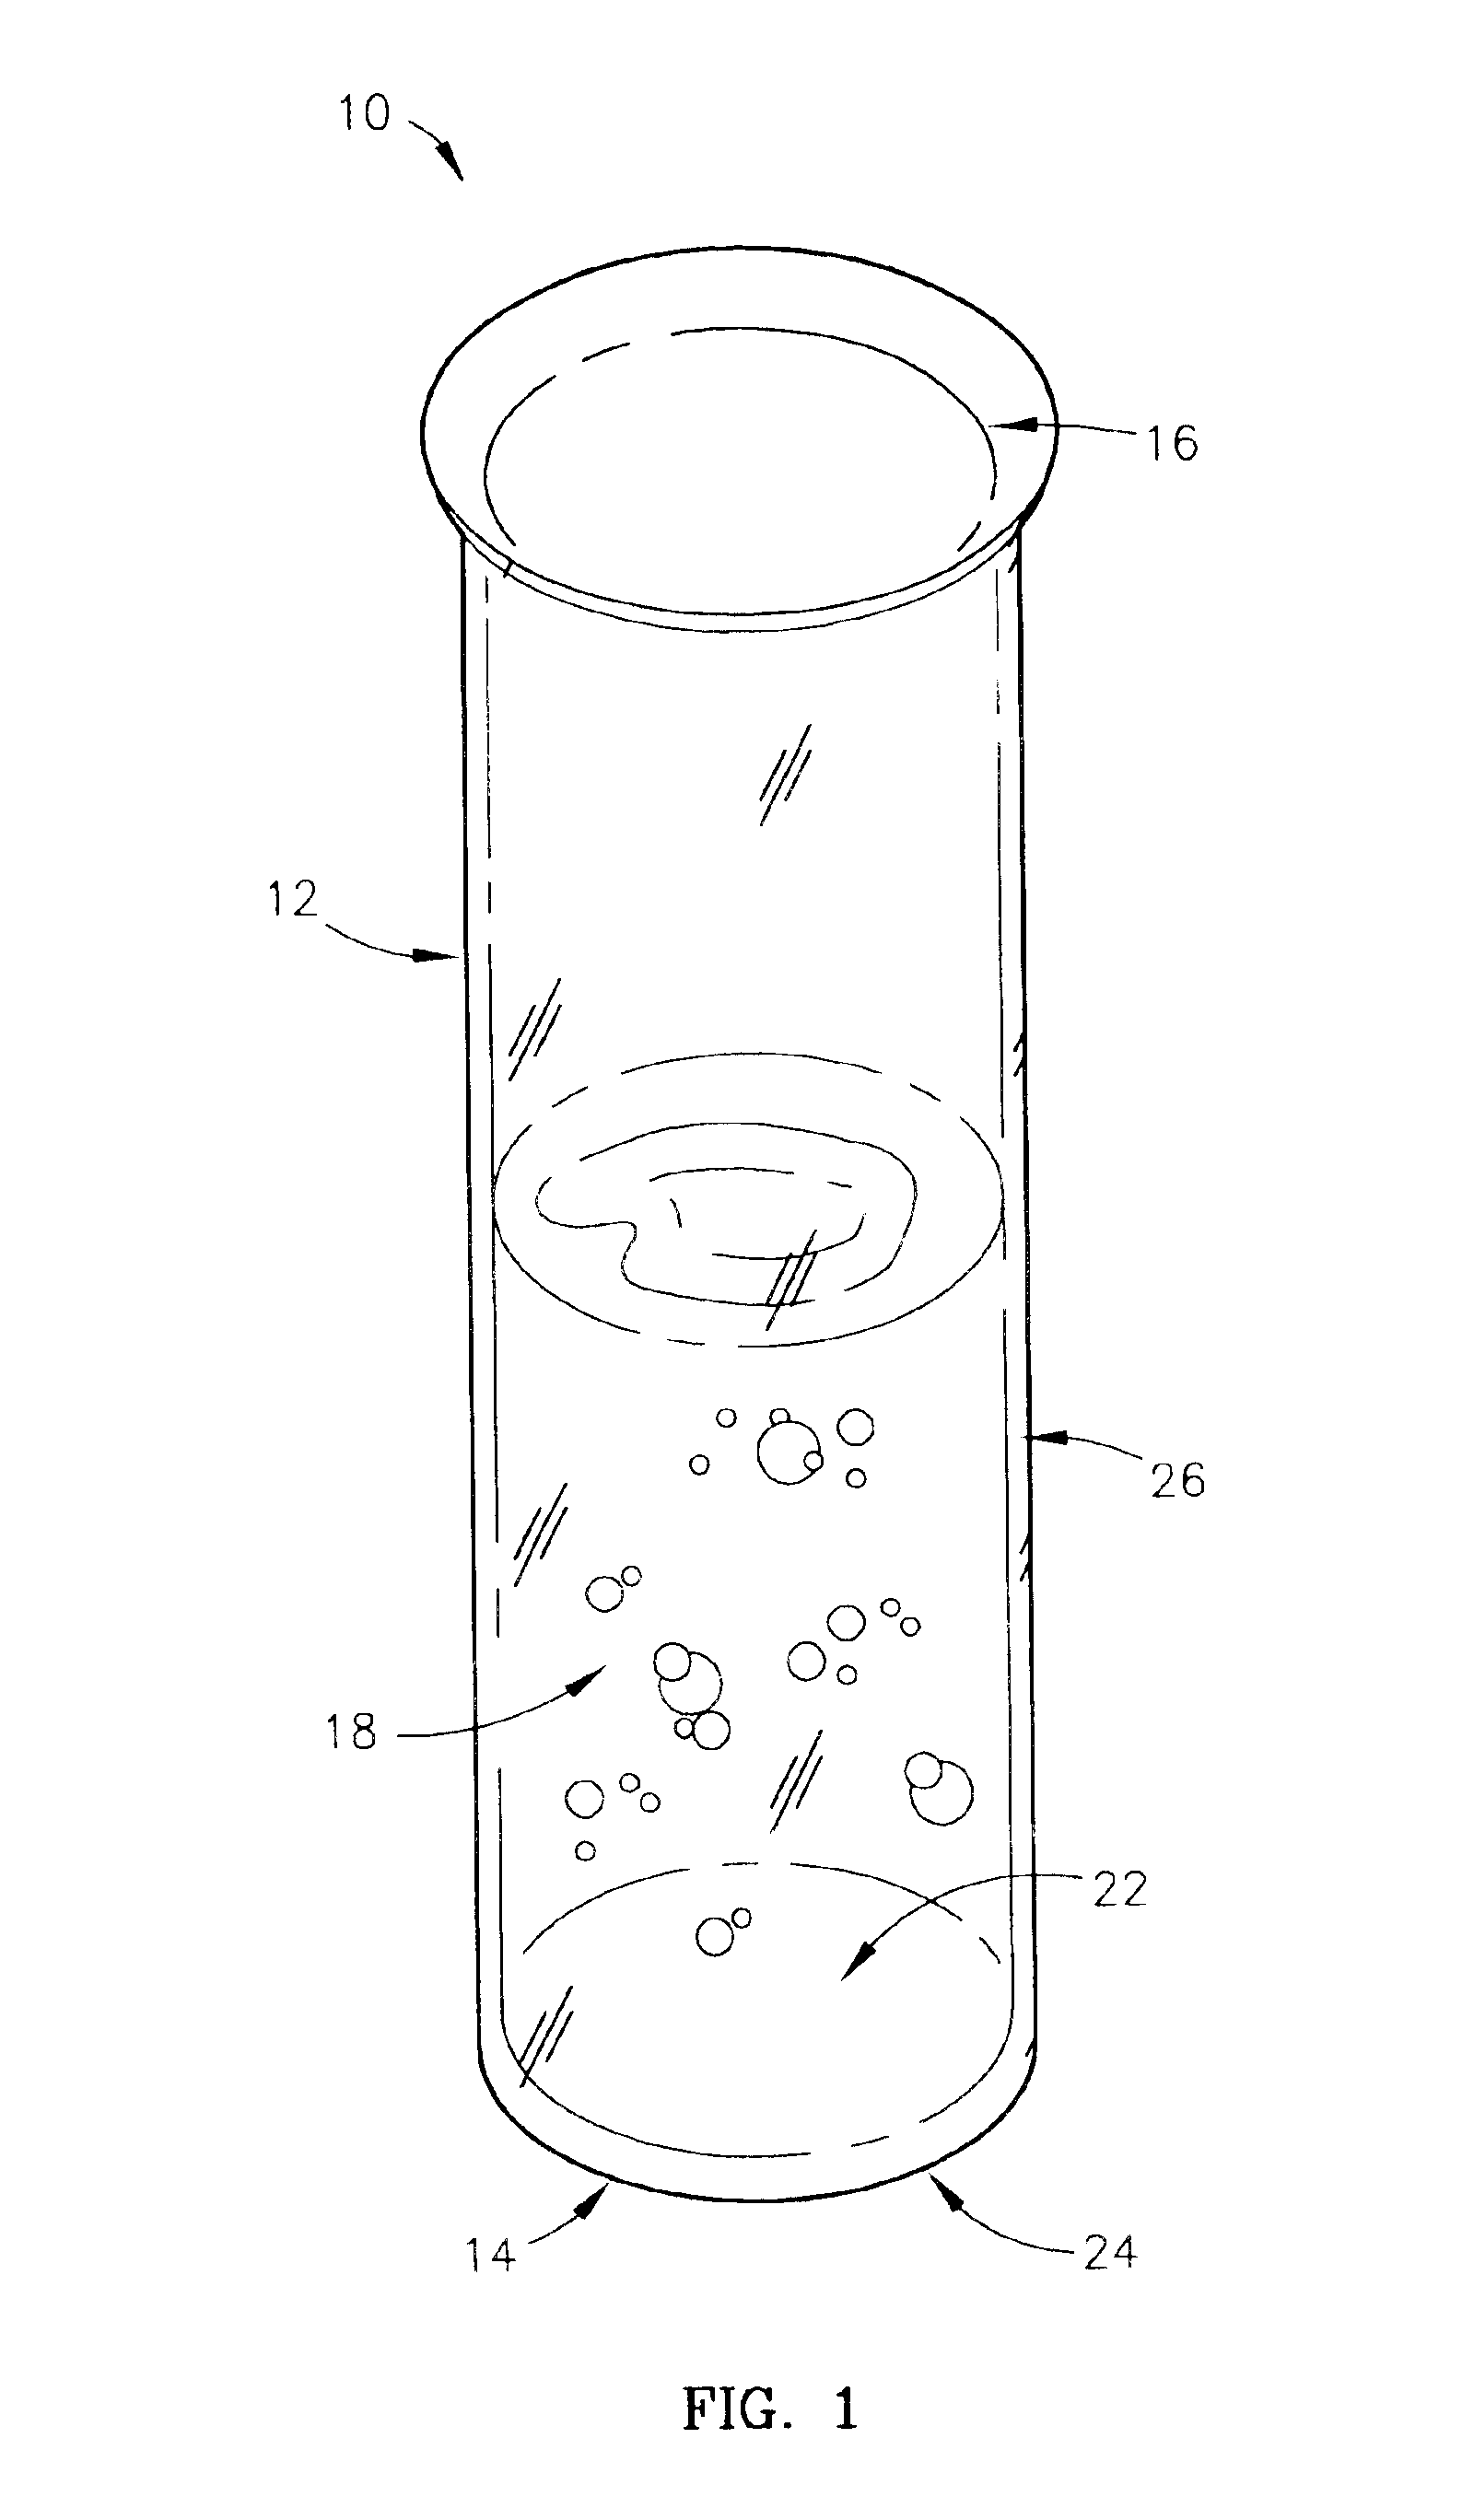 Apparatus for cleaning an animal's paw